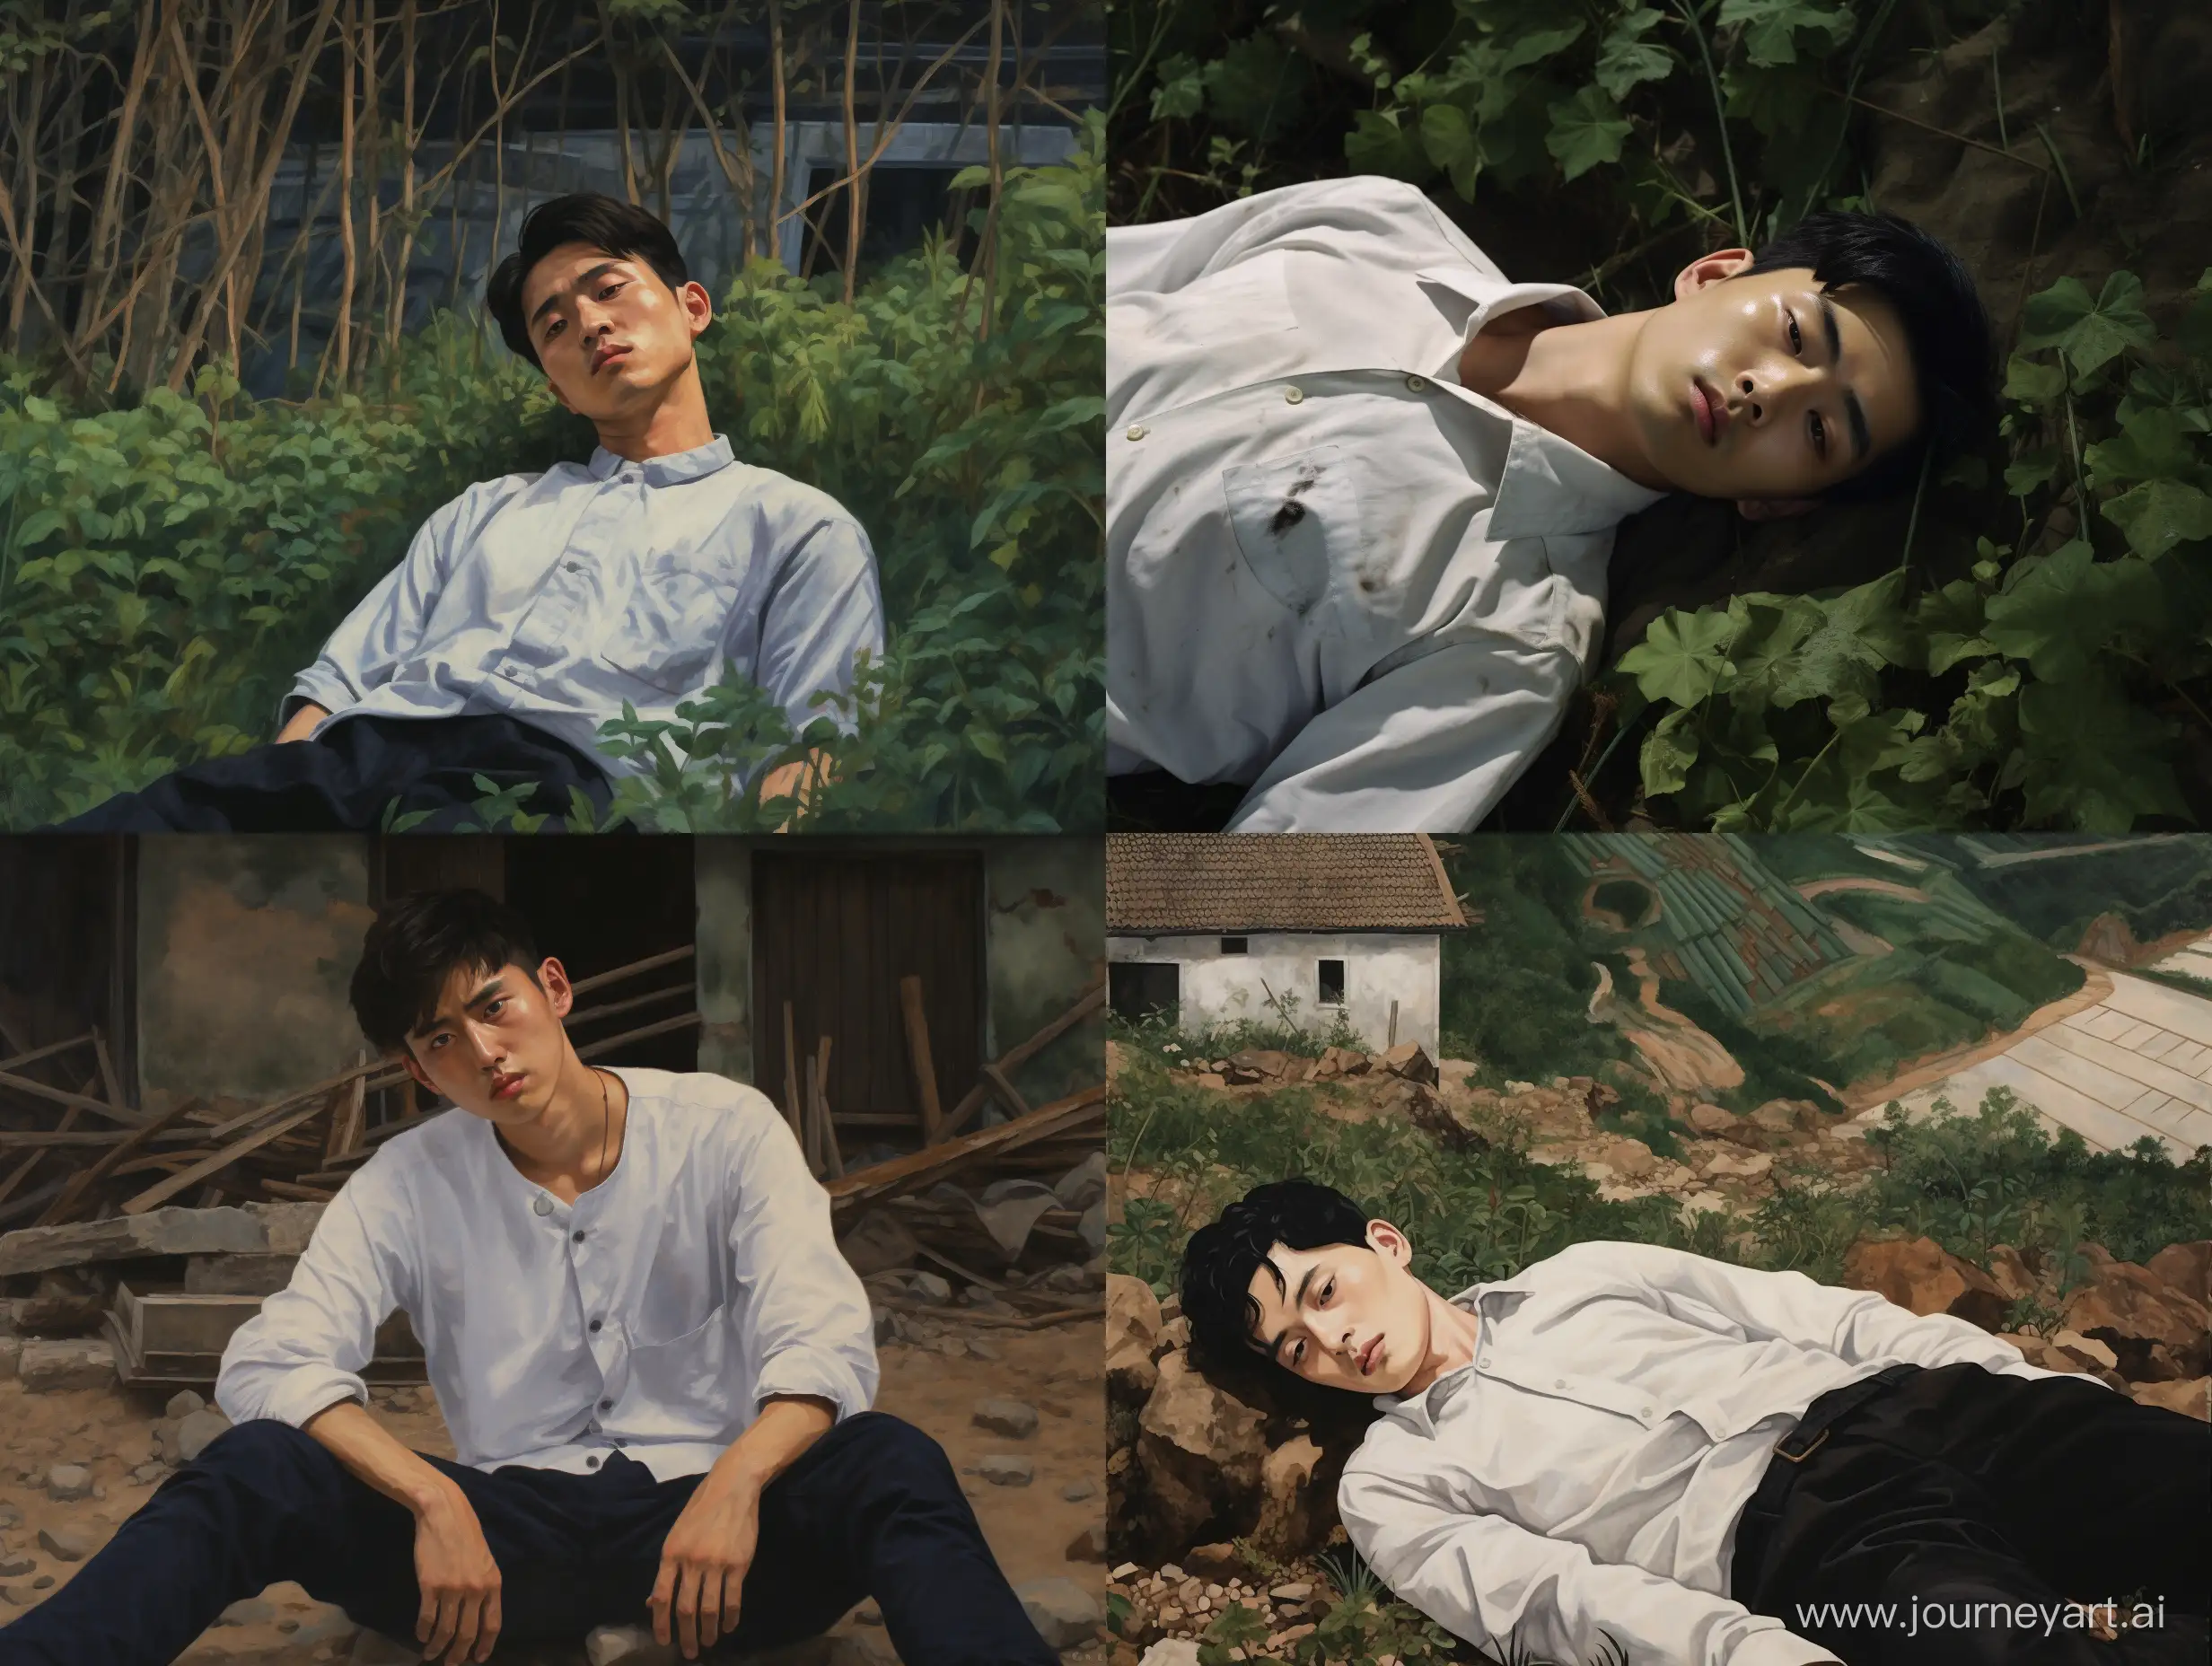 In the countryside of China, next to the house, many people looked at jijun, a boy, aged 18, thin, wearing a white shirt and black pants, unconscious on the ground and just woke up;